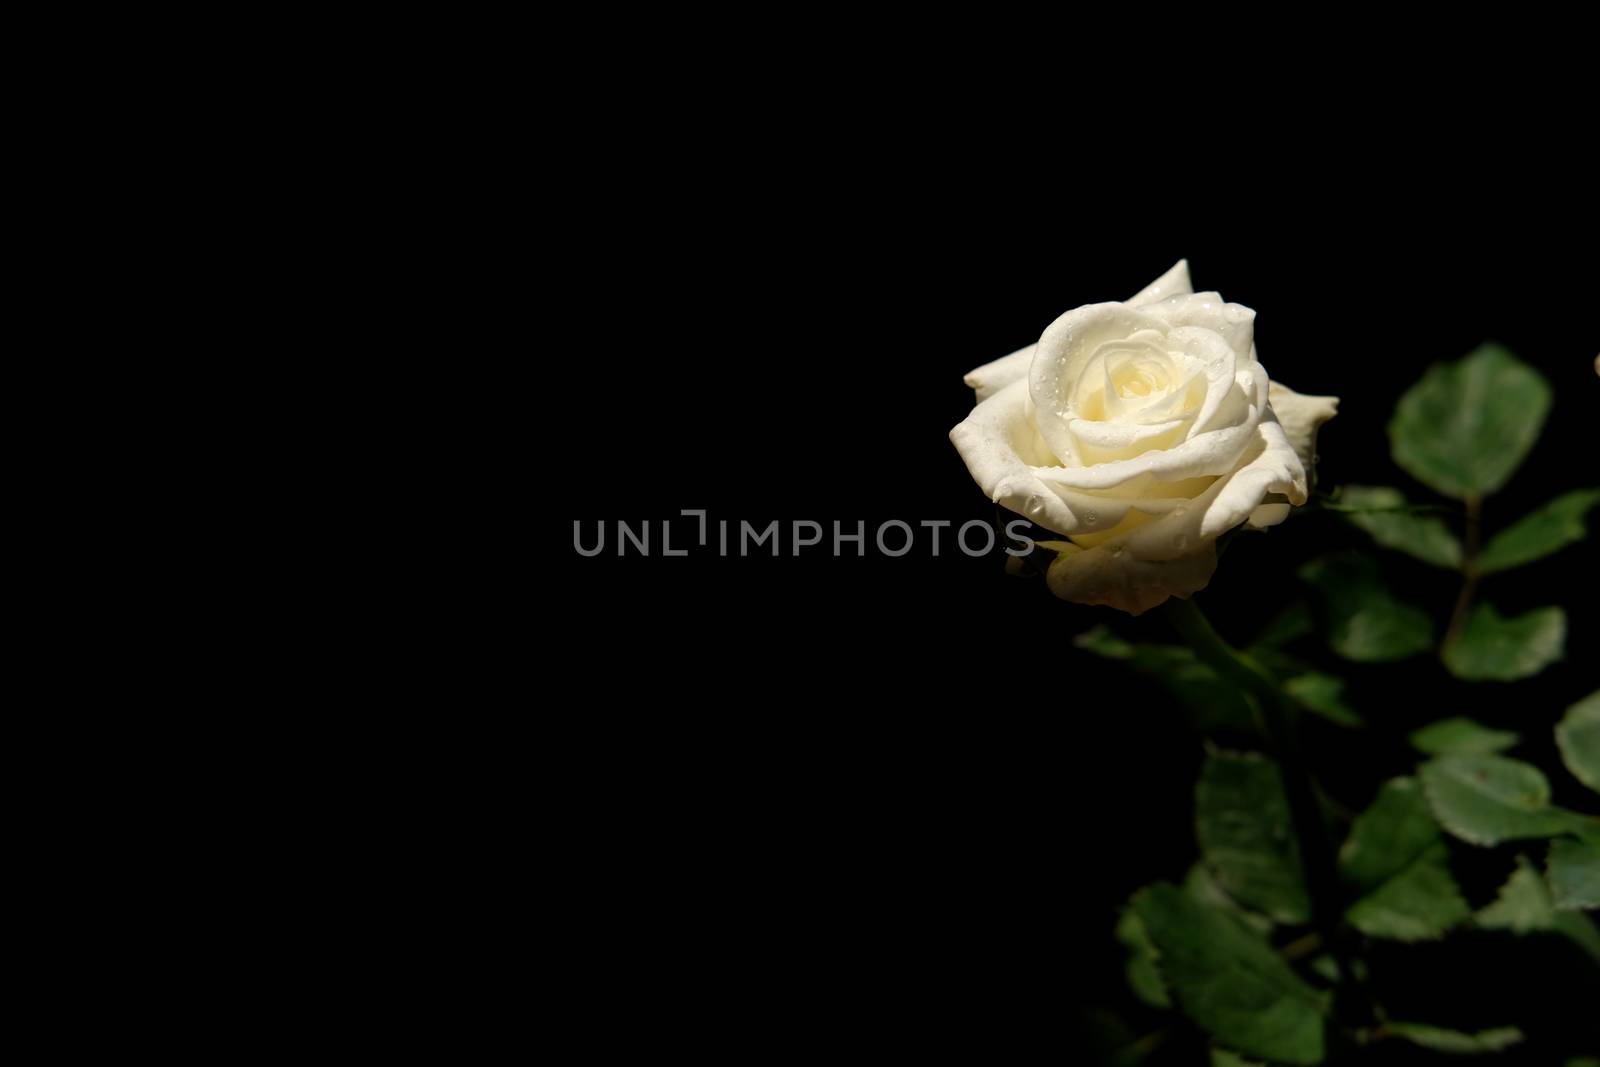 white rose flower with stem and leaves isolated on black background by Macrostud